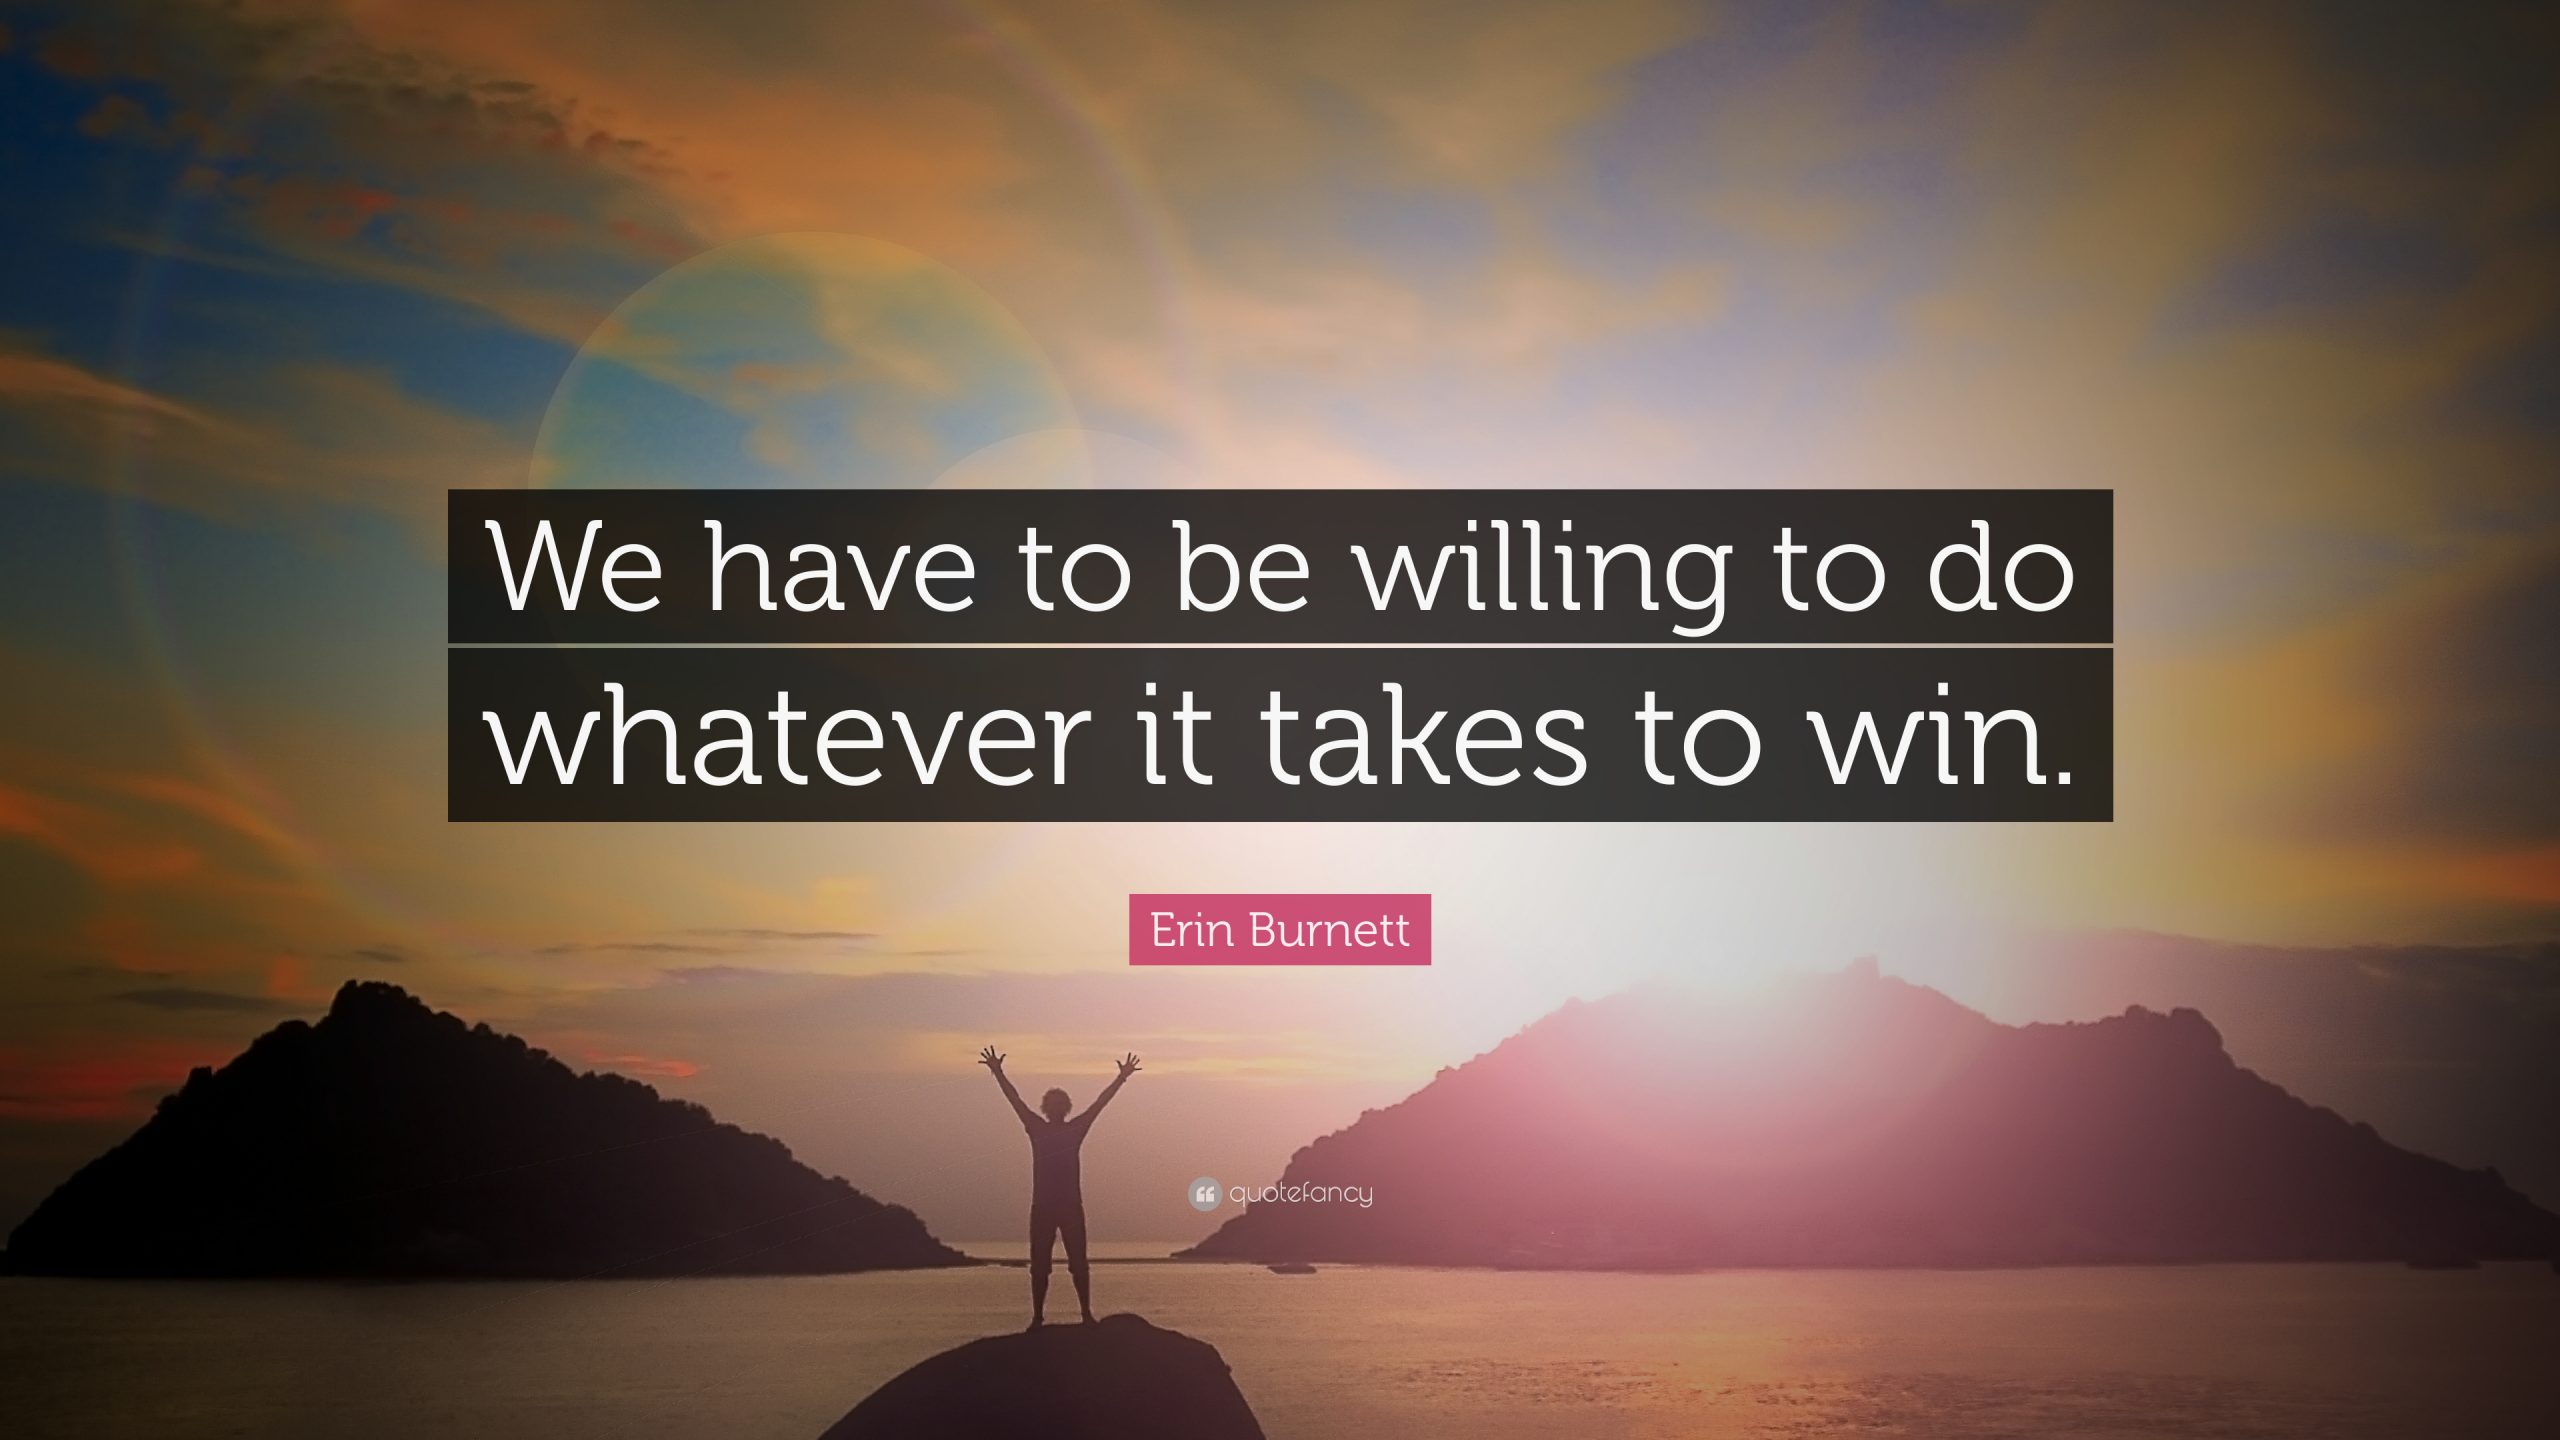 Are You Willing To Do Whatever It Takes?